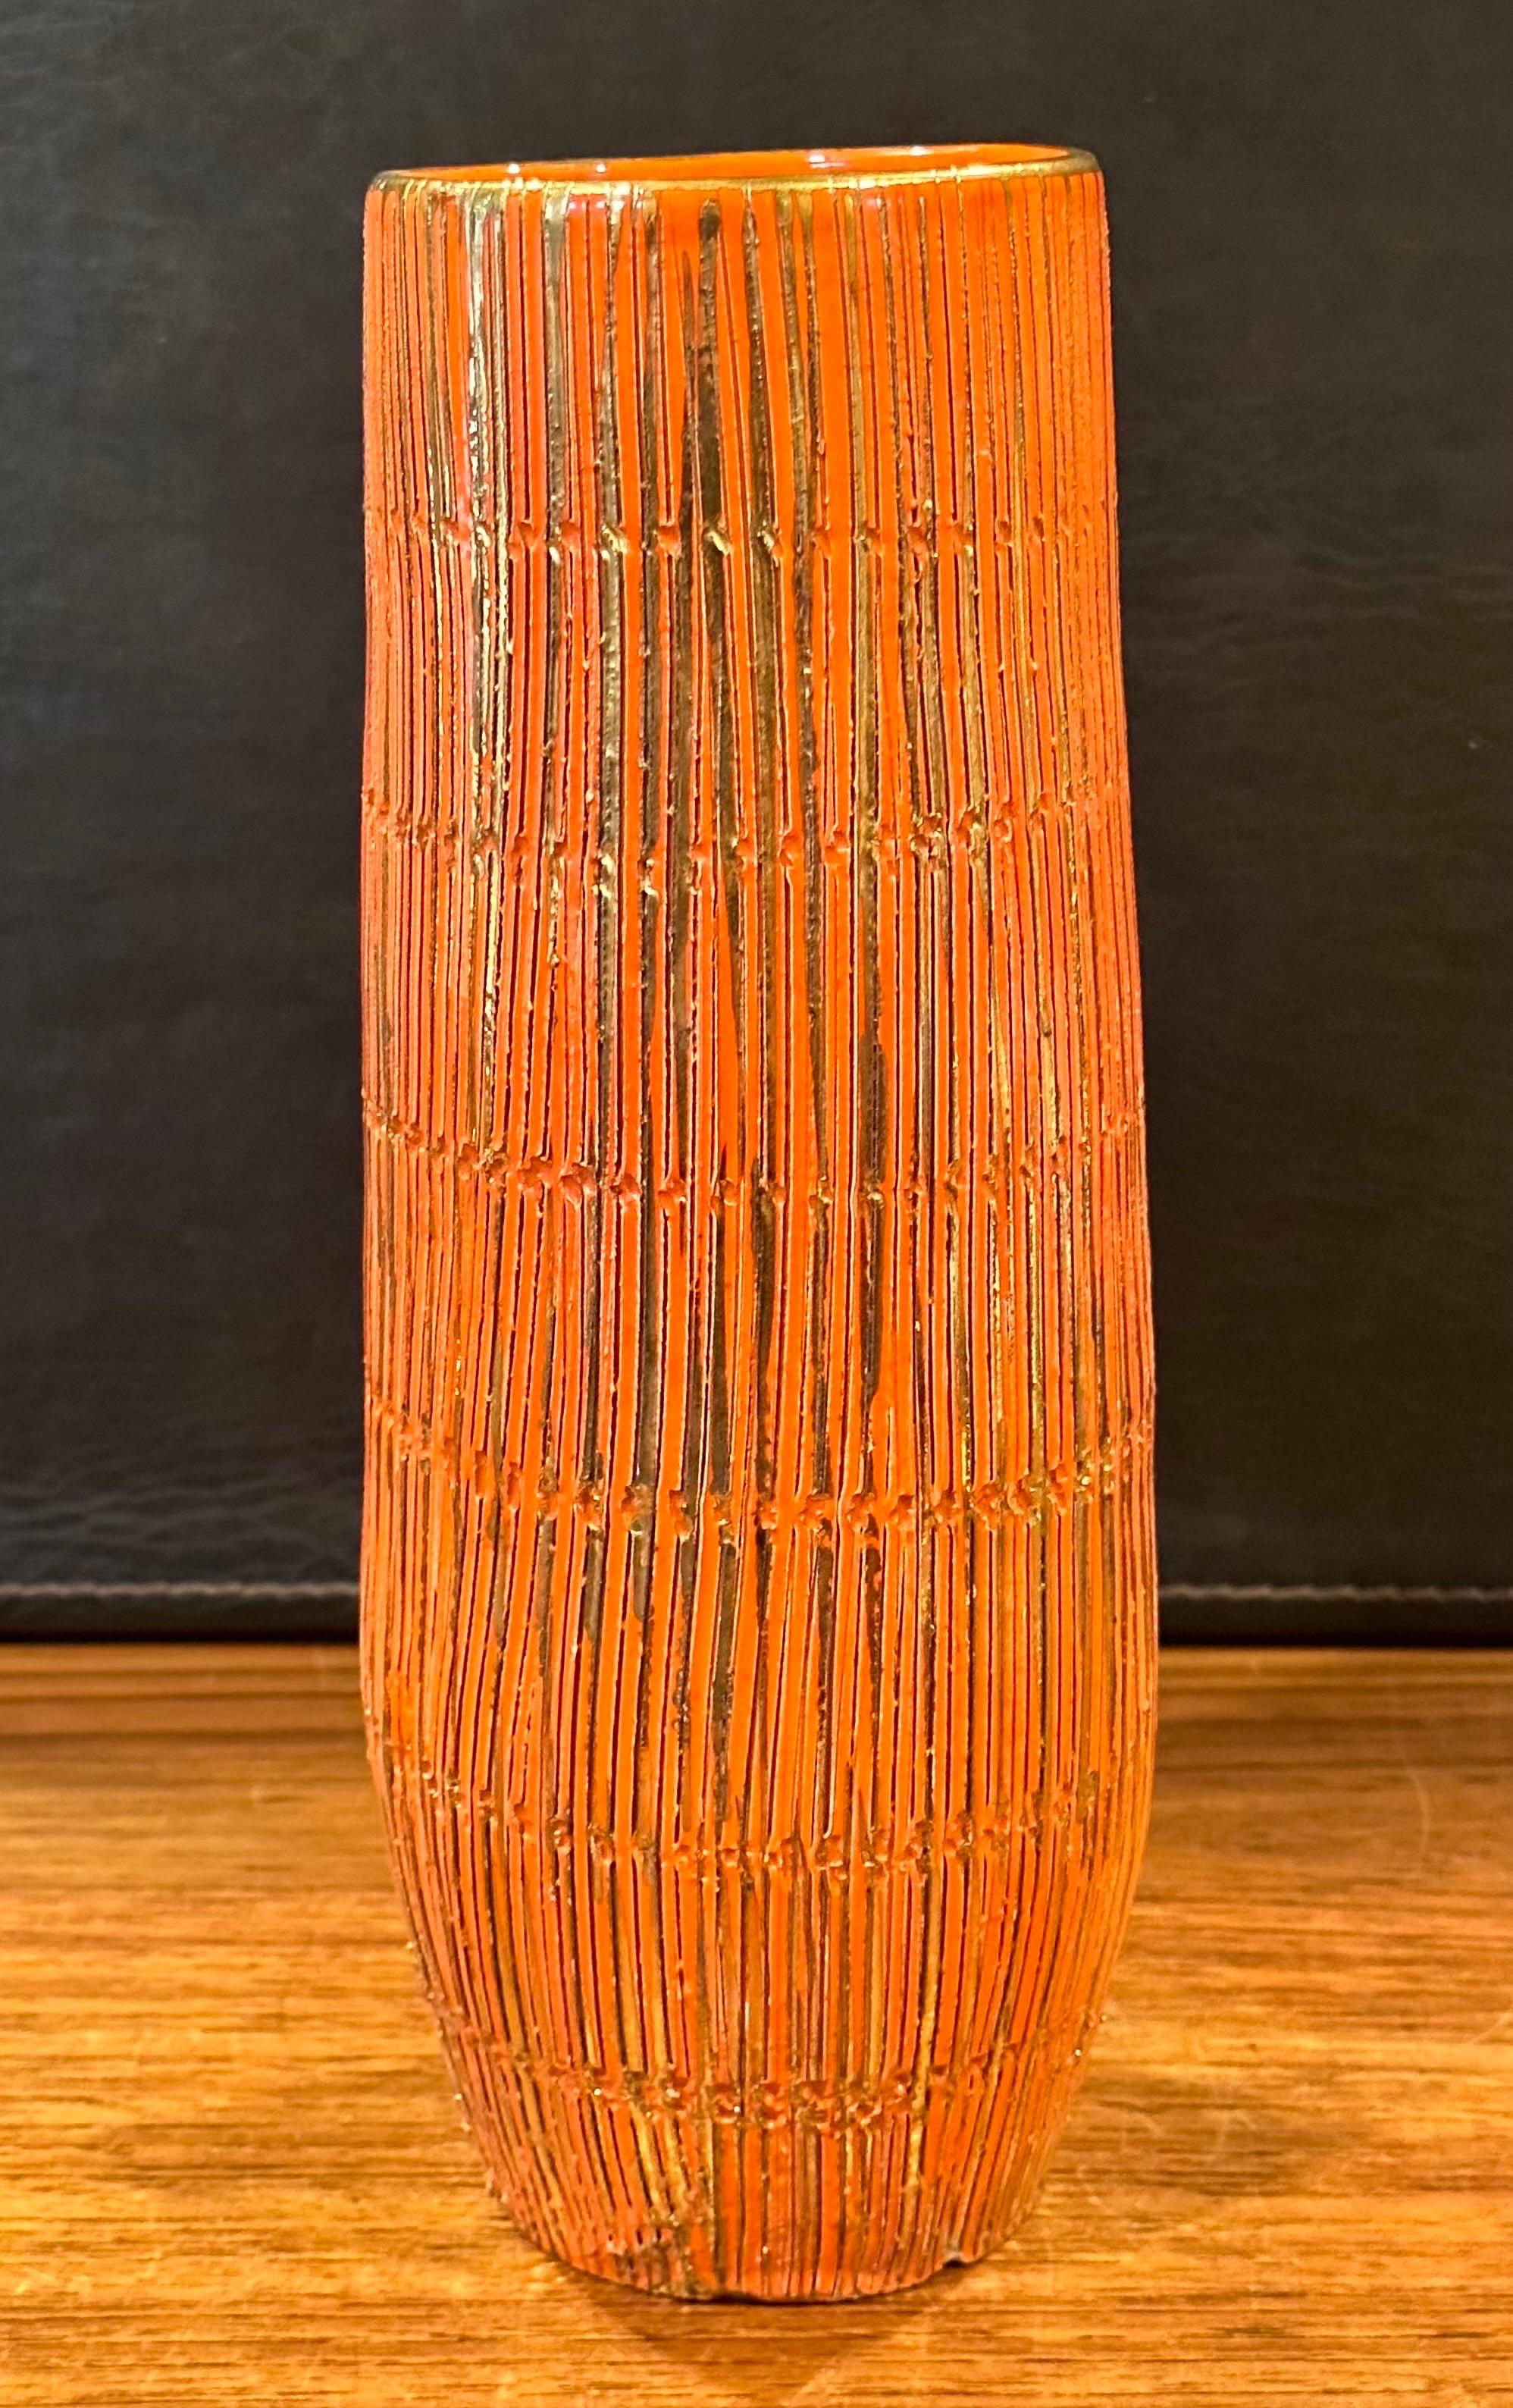 A vibrant orange glaze and gold gilt MCM Sgraffito ceramic vase by Aldo Londi for Bitossi Seta Series (silk), circa 1950s.  The vase is striated with bands incised with small uneven shapes. The gold gilt stripes have been hand painted over the